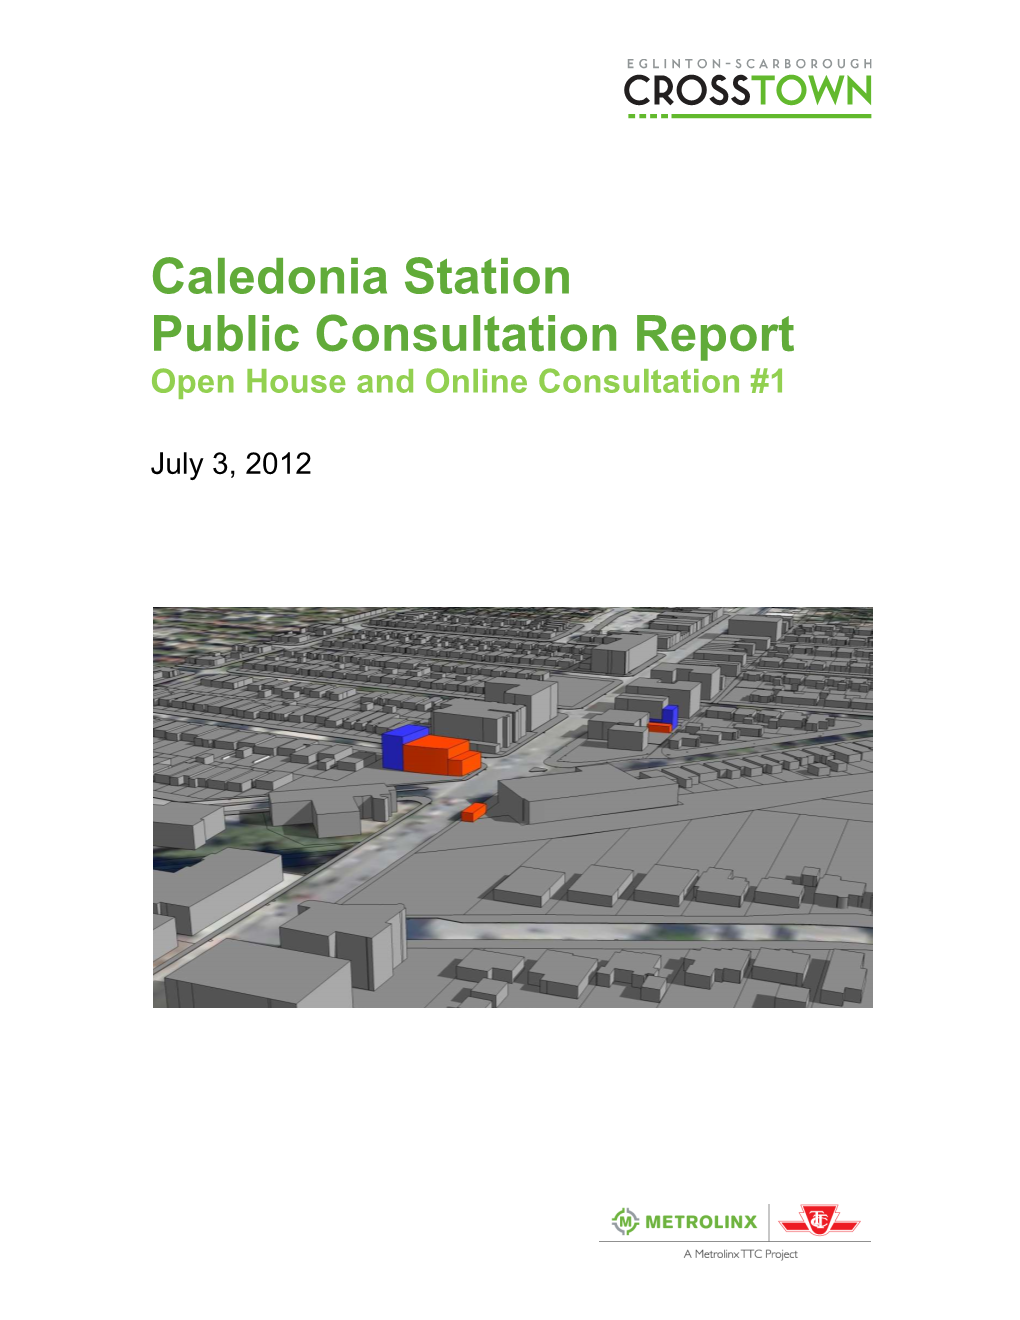 Caledonia Station Public Consultation Report Open House and Online Consultation #1